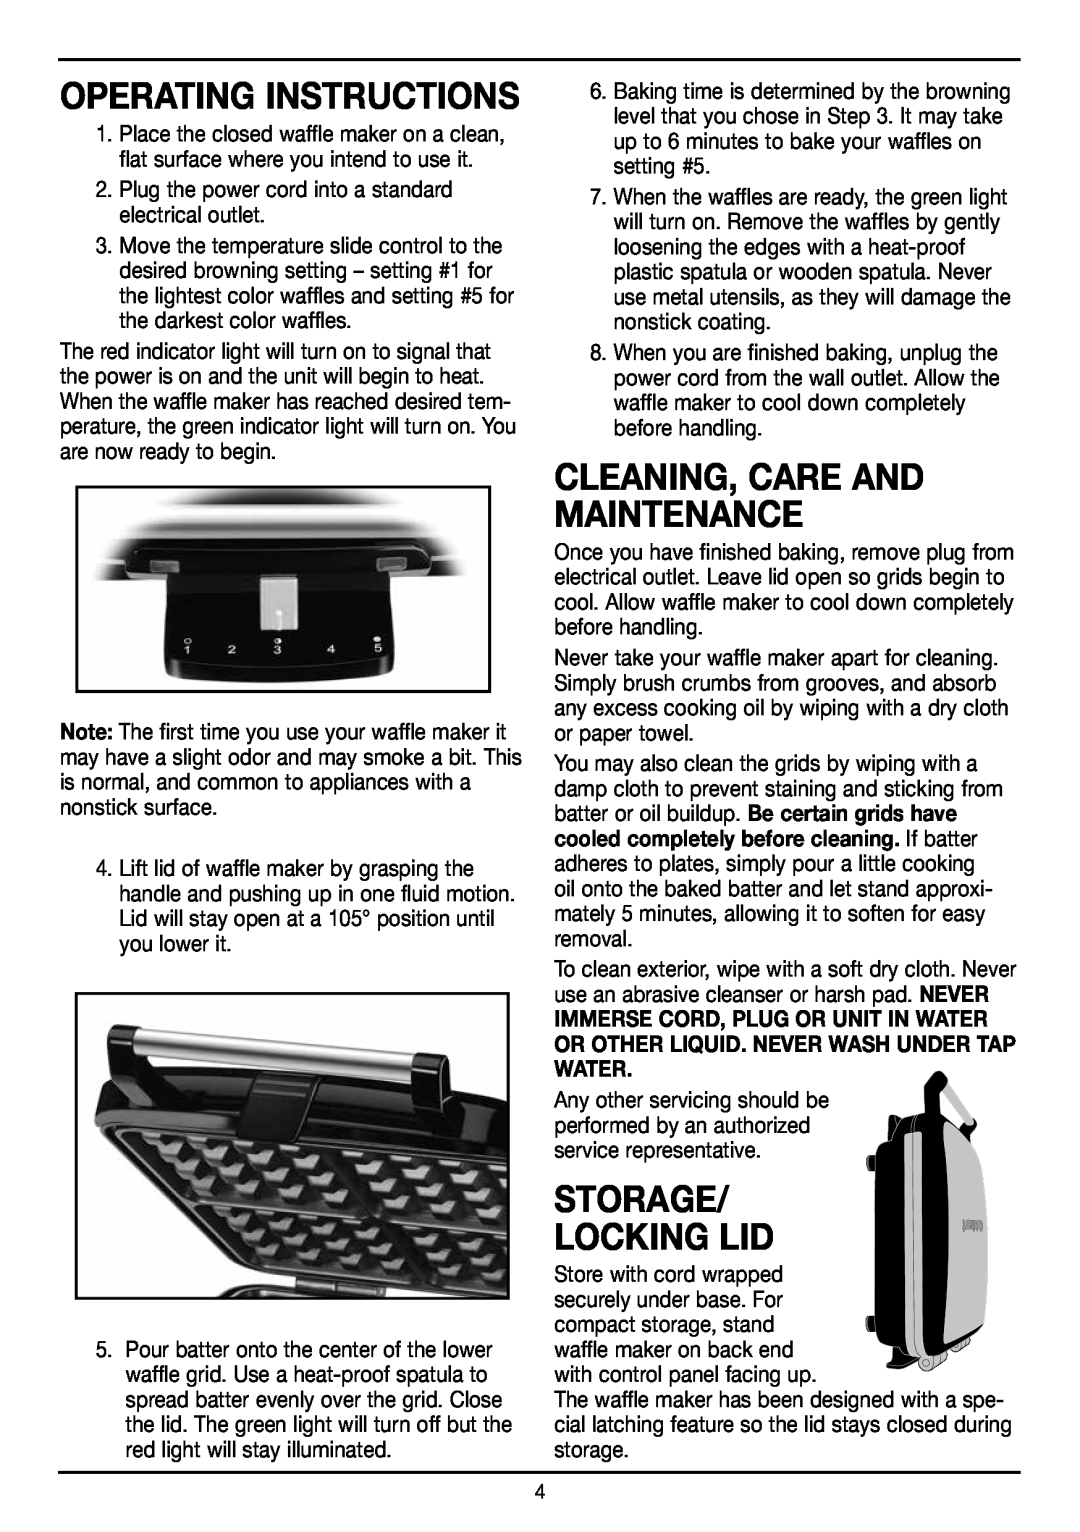 Cuisinart WAF-150 manual Cleaning, Care And Maintenance, Storage Locking Lid, Operating Instructions 